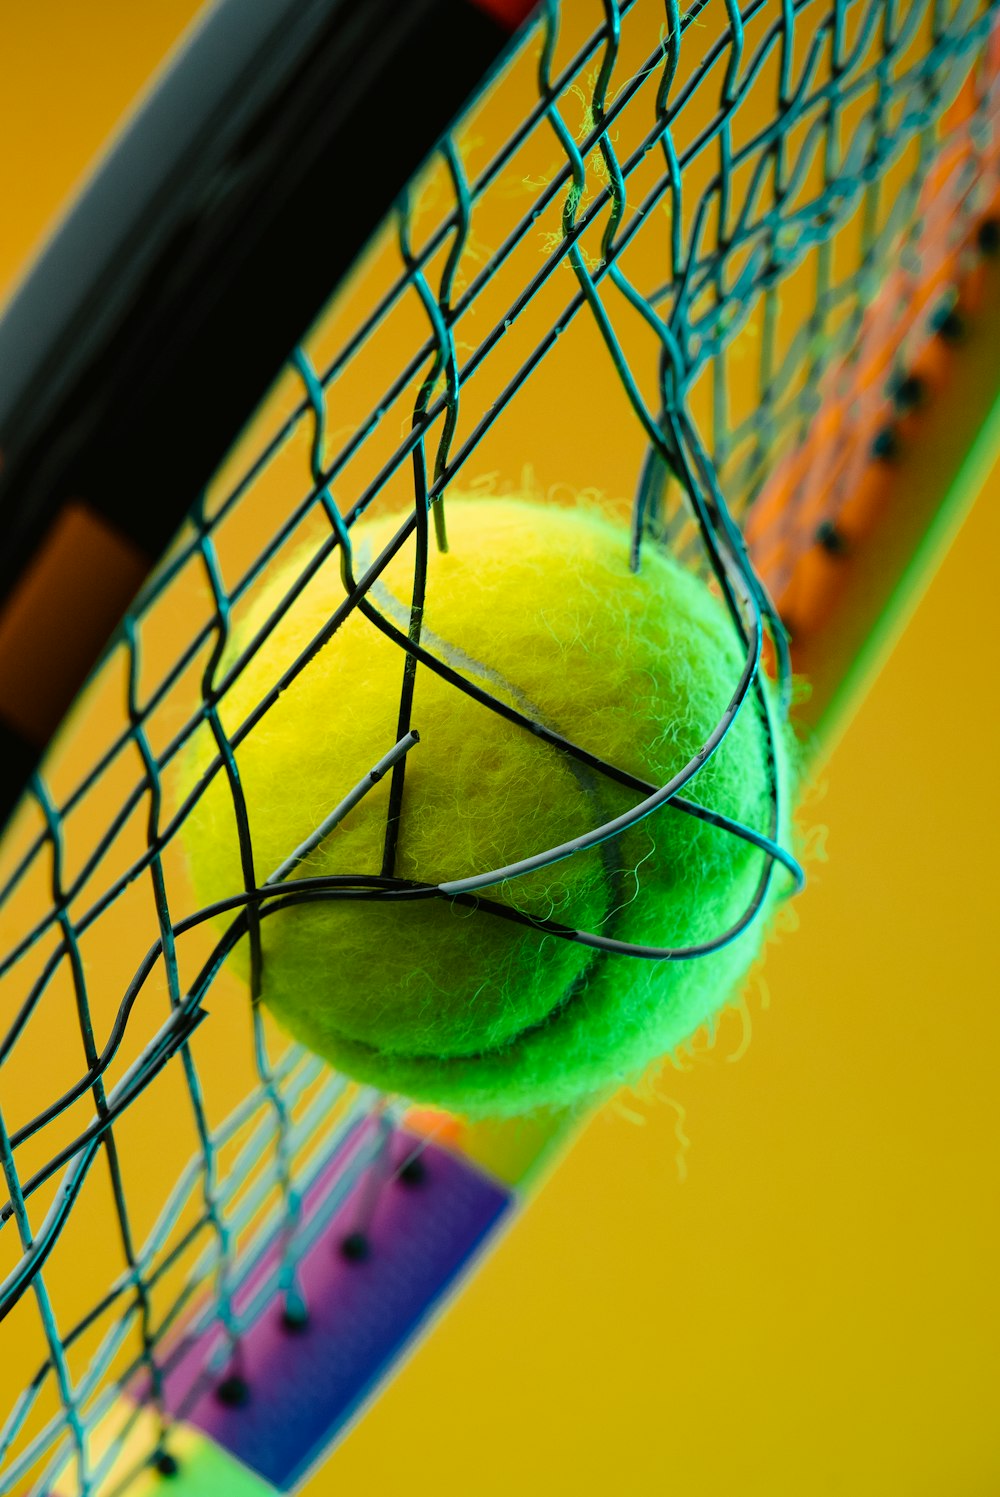 a tennis racket with a tennis ball inside of it